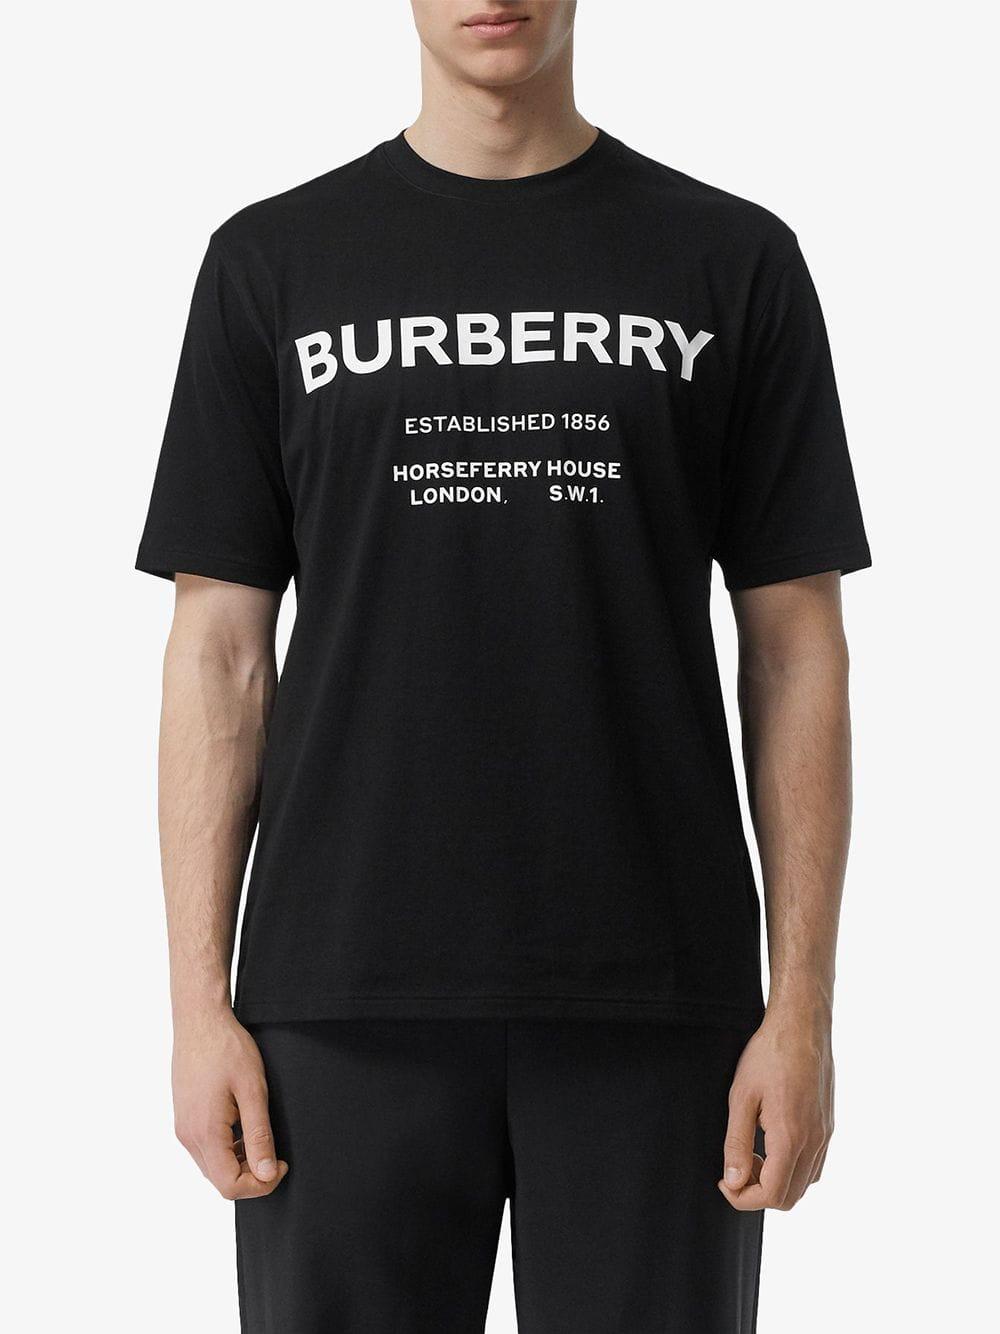 Burberry Horseferry Print Cotton T-shirt in Black for Men - Lyst